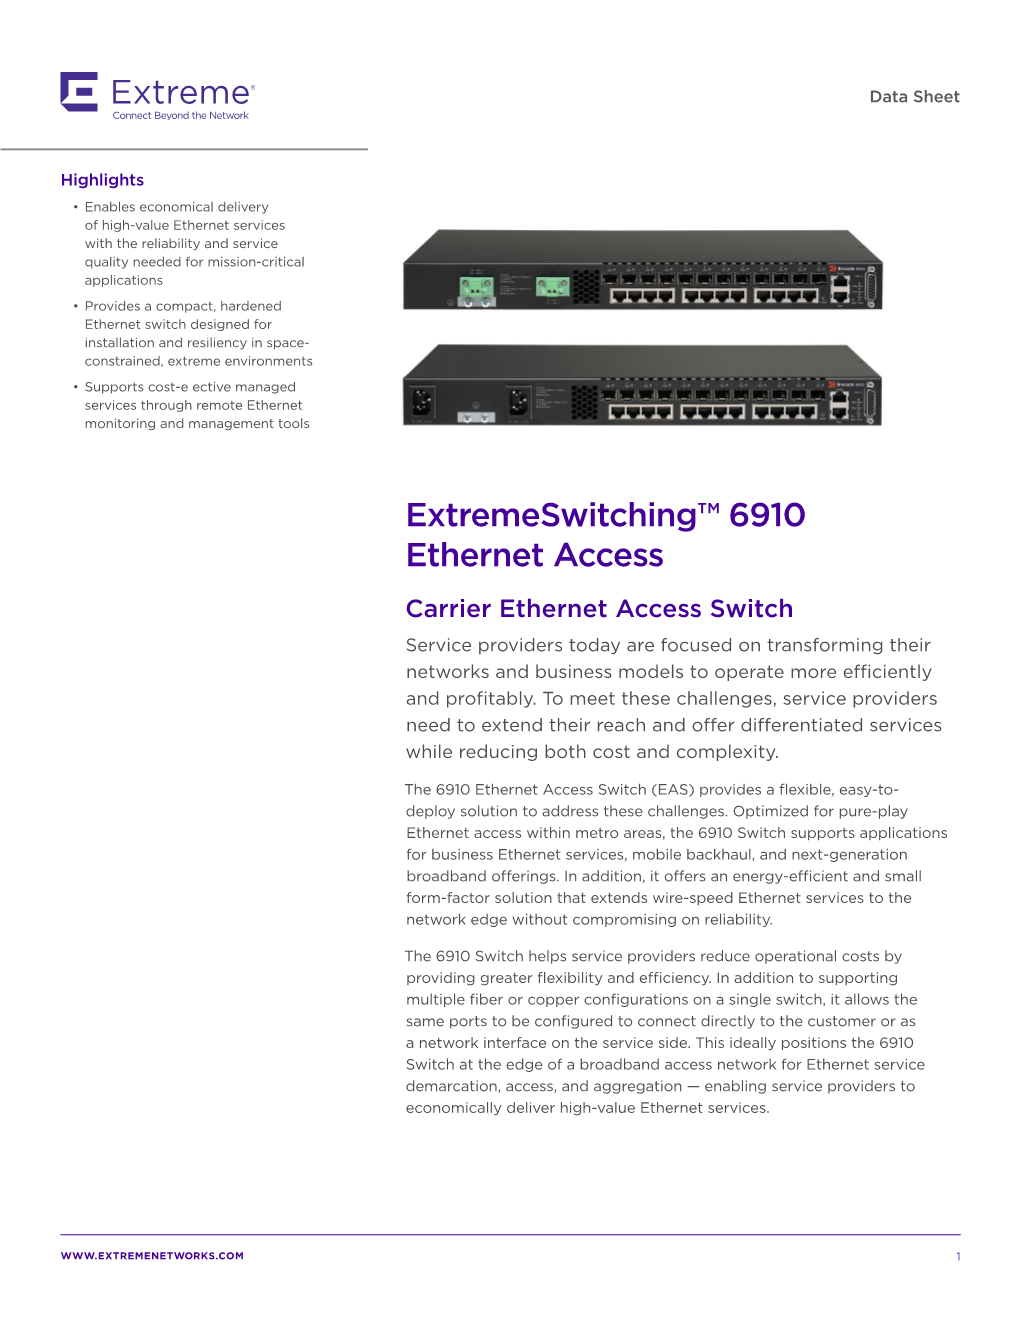 6910 Ethernet Access Switch (EAS) Provides a Flexible, Easy-To- Deploy Solution to Address These Challenges